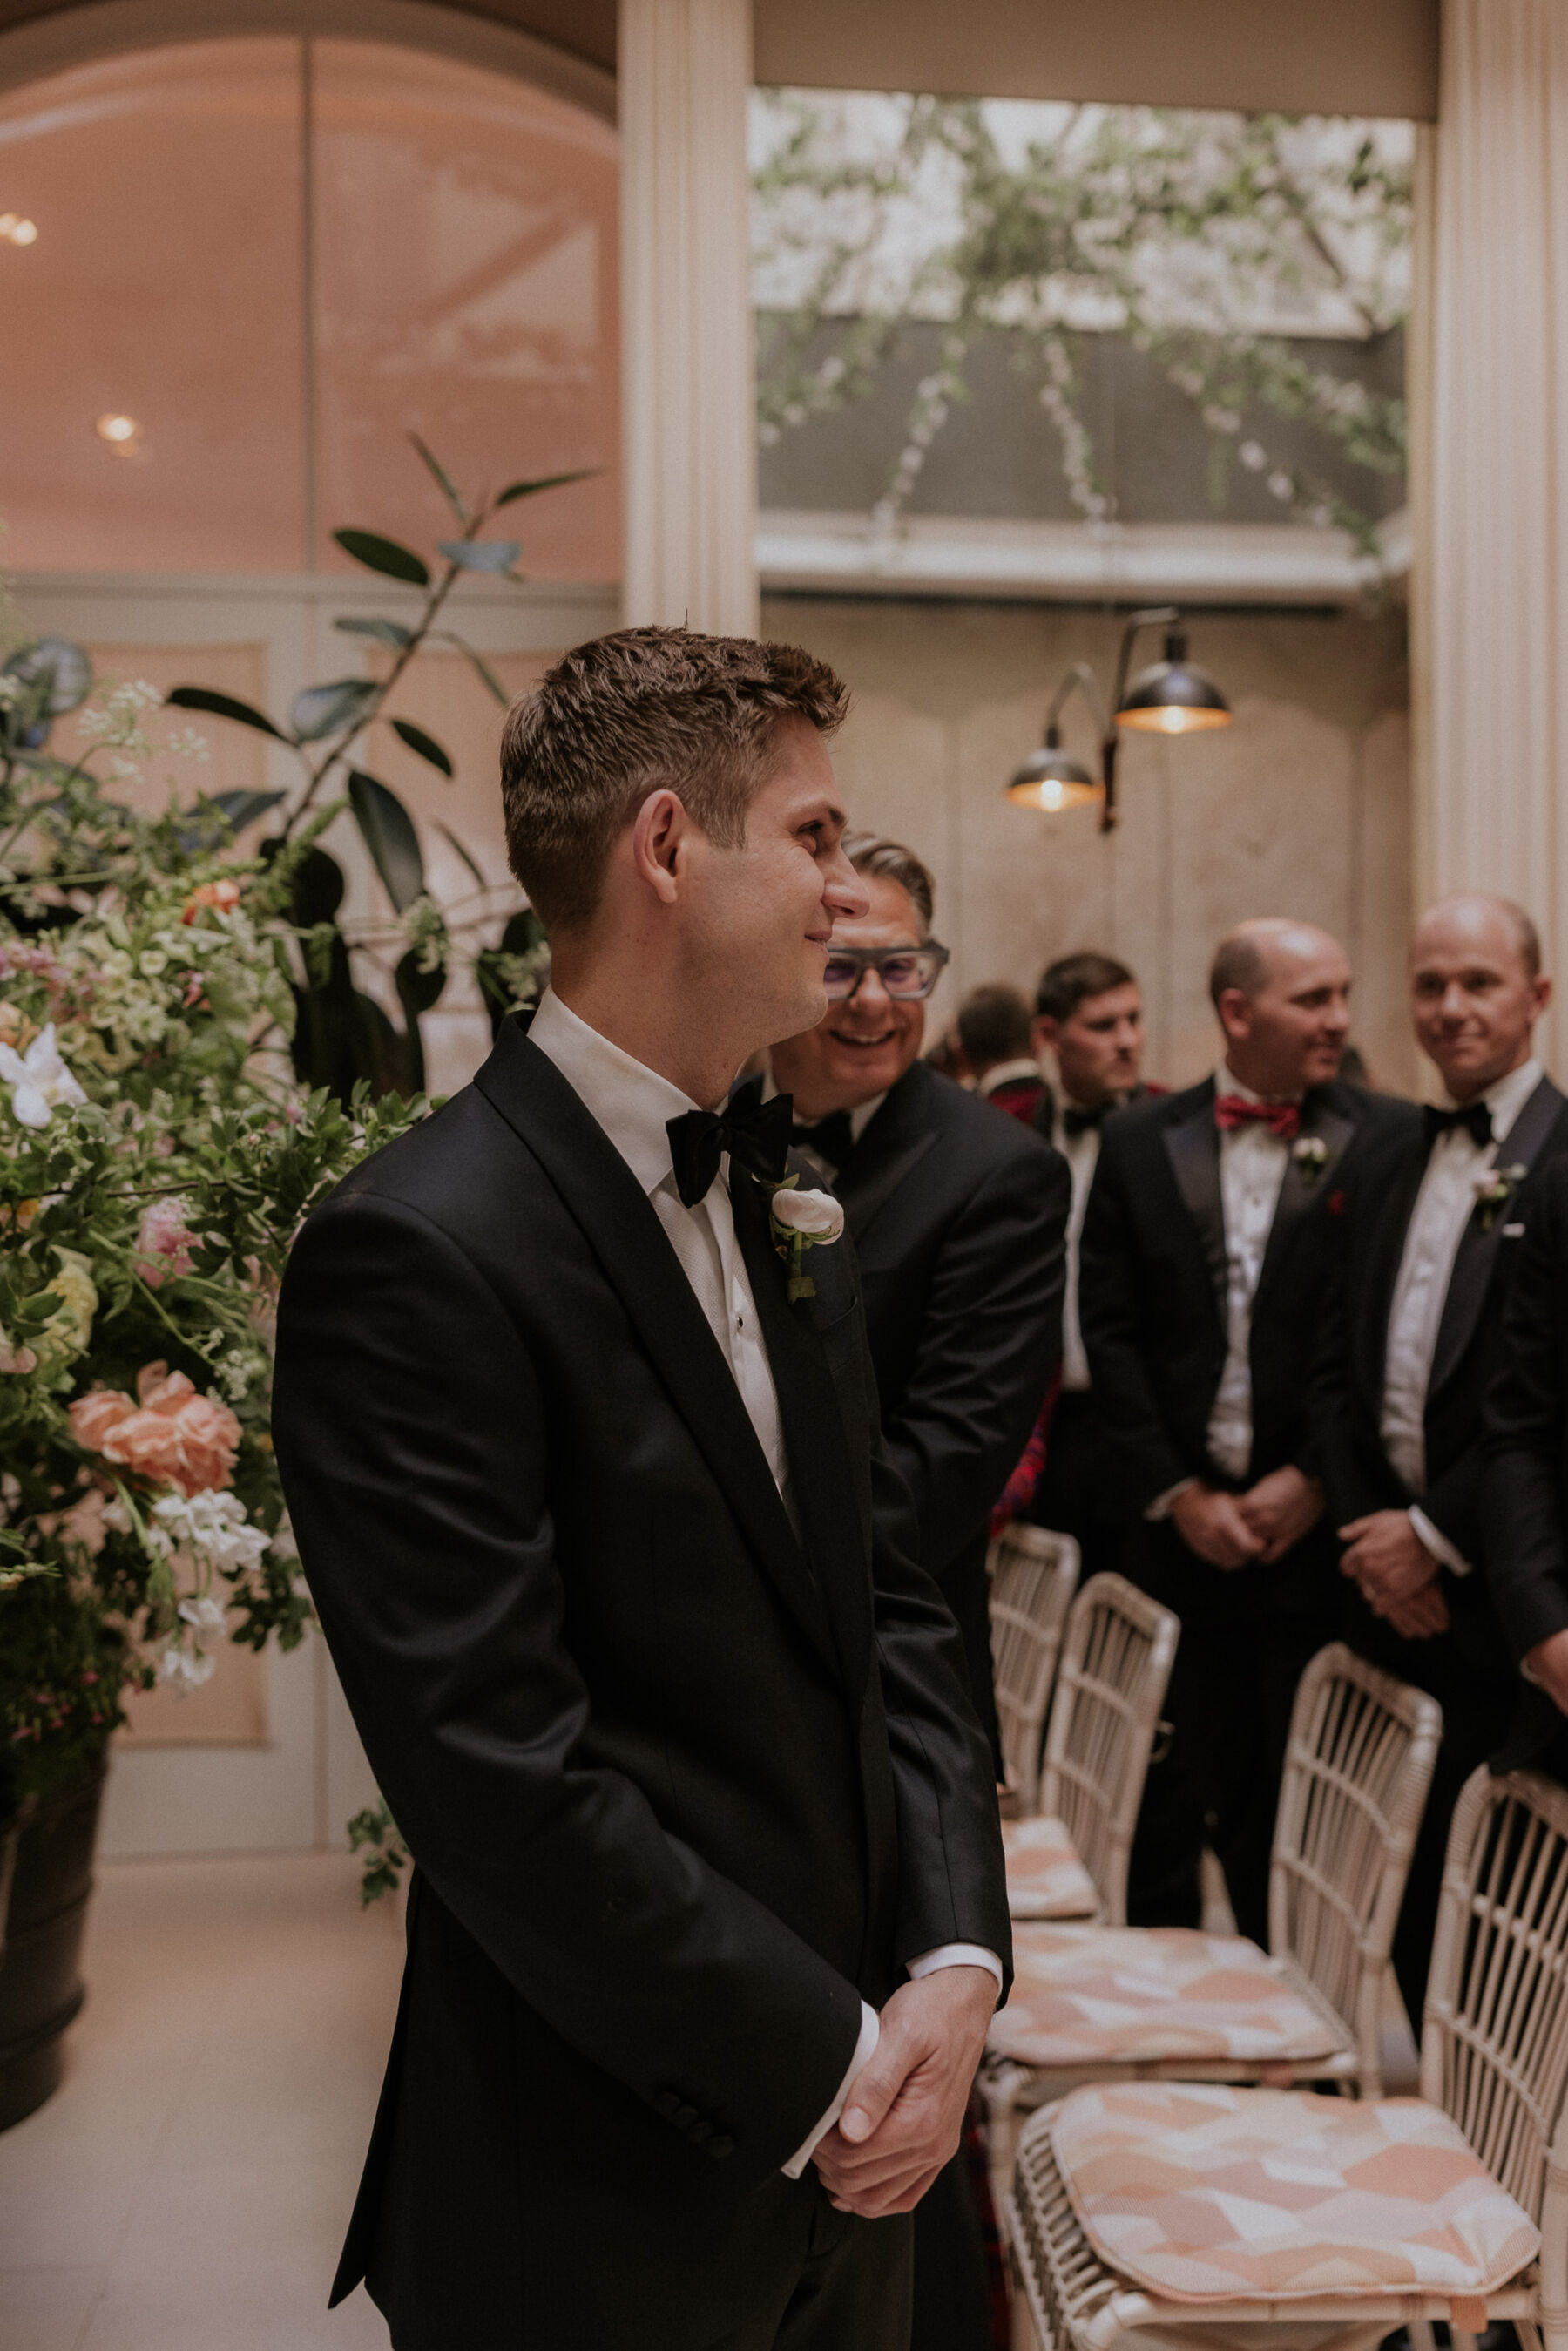 Groom in black tie waiting for his bride. Maja Tsolo Photography.